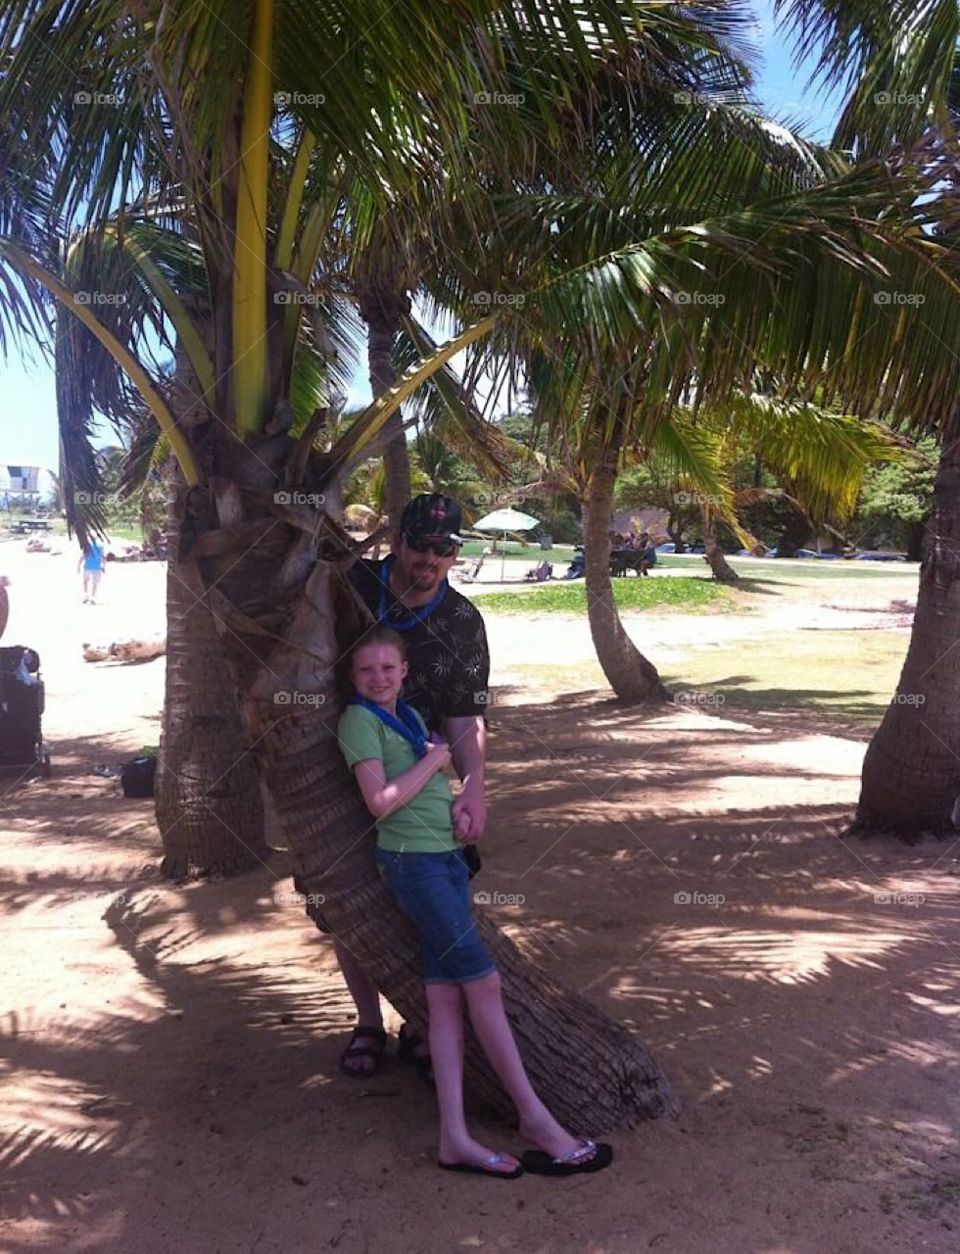 In Maui at the bannon trees.